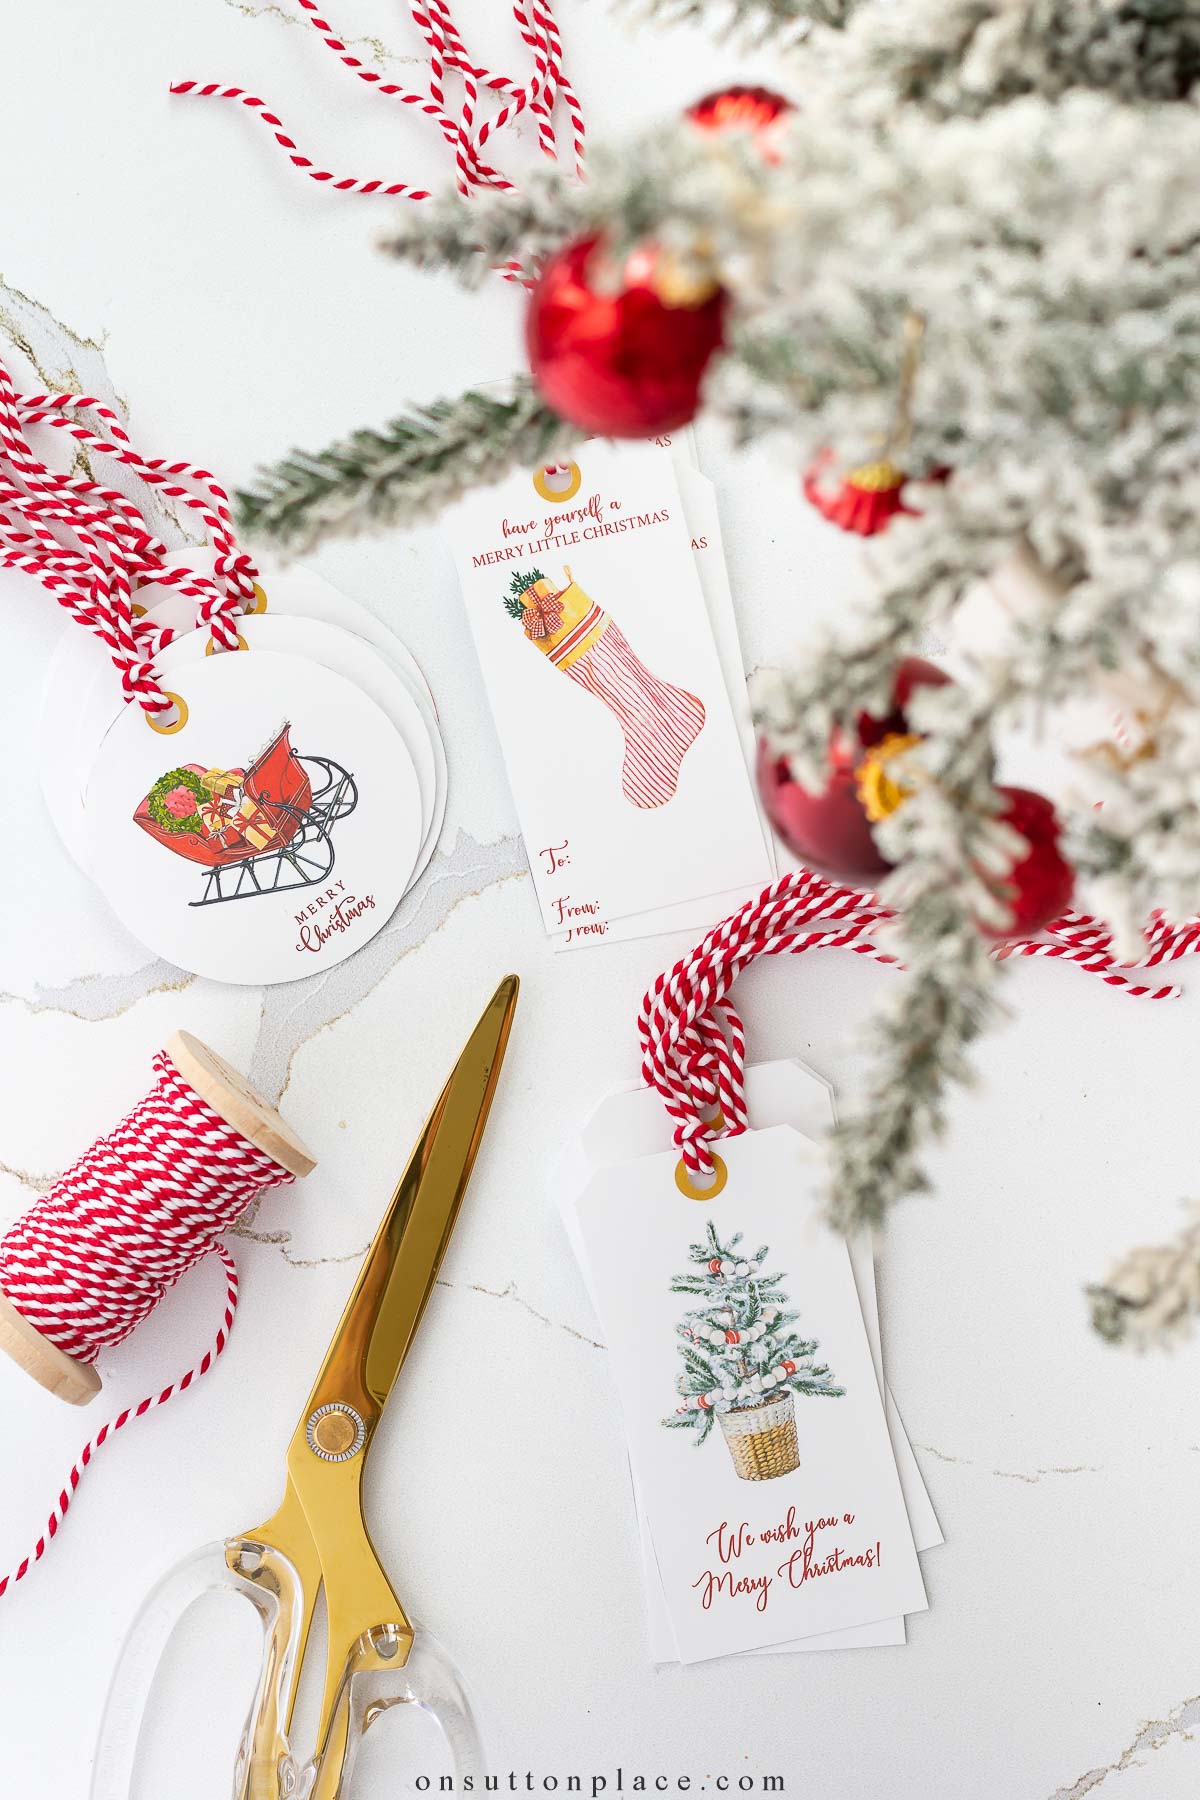 4 Easy Gift Topper Ideas, Gift Wrapping